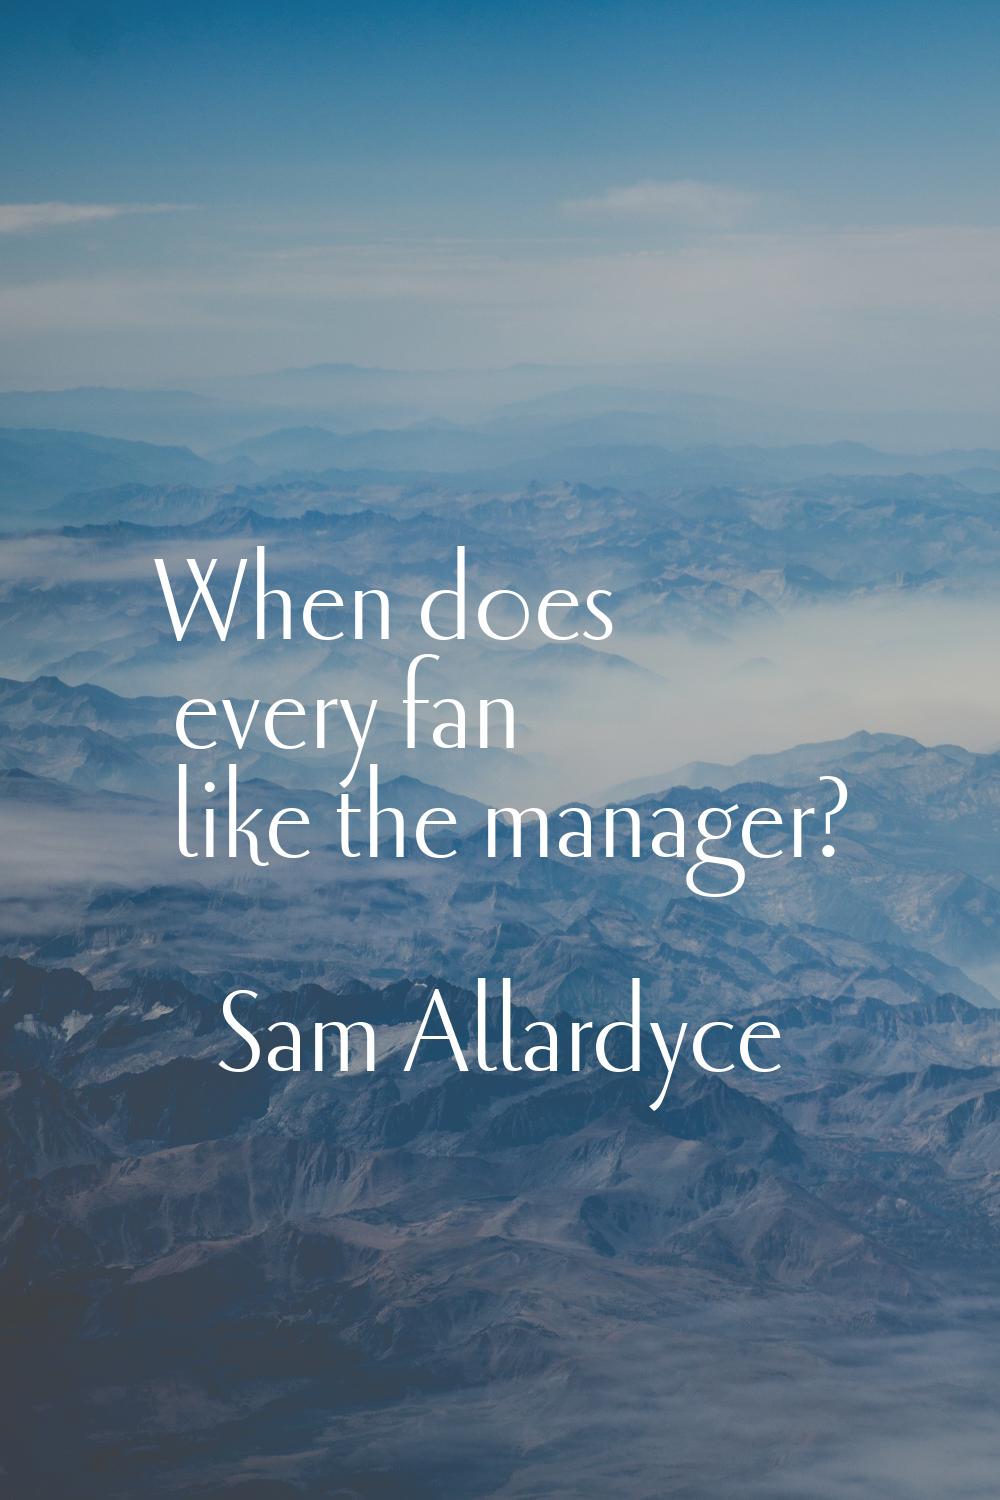 When does every fan like the manager?